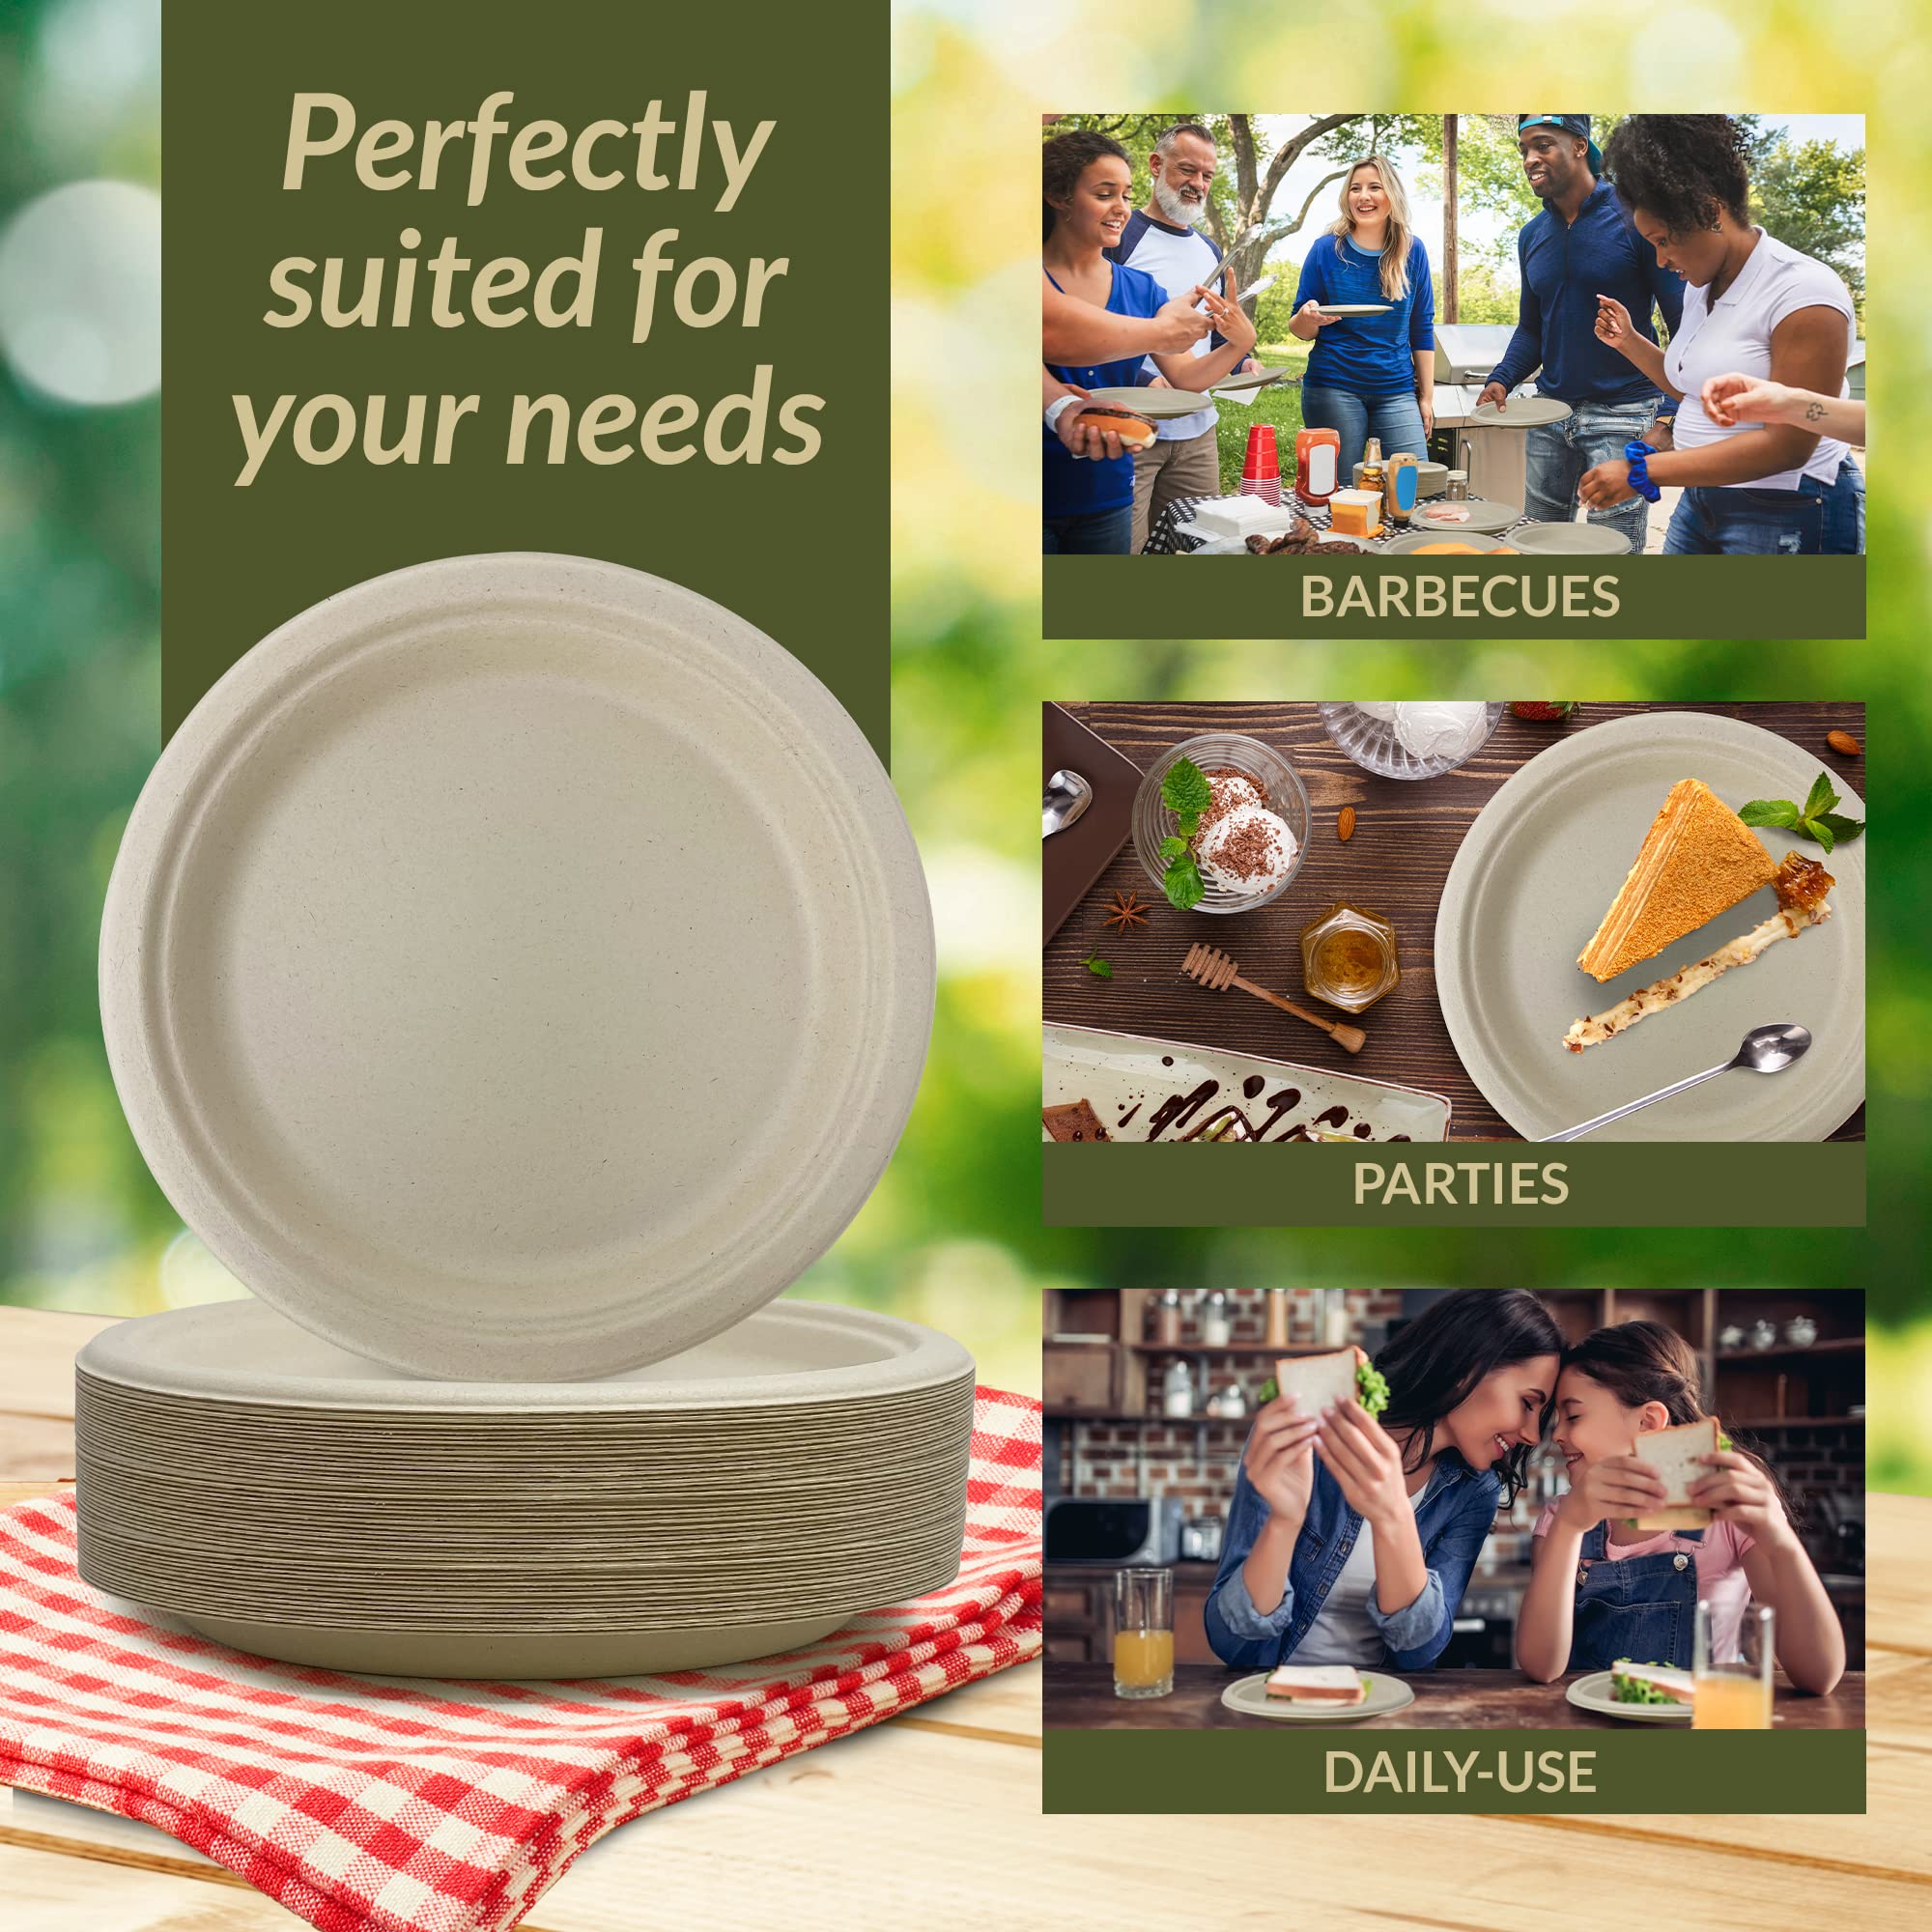 Reli. Compostable Paper Plates 9 Inch (140 Pack Bulk) | Brown Disposable Plates 9" | Heavy Duty Paper Plates, Eco-Friendly | Made of Sugarcane Fibers/Bagasse - Biodegradable | Microwavable (Natural)